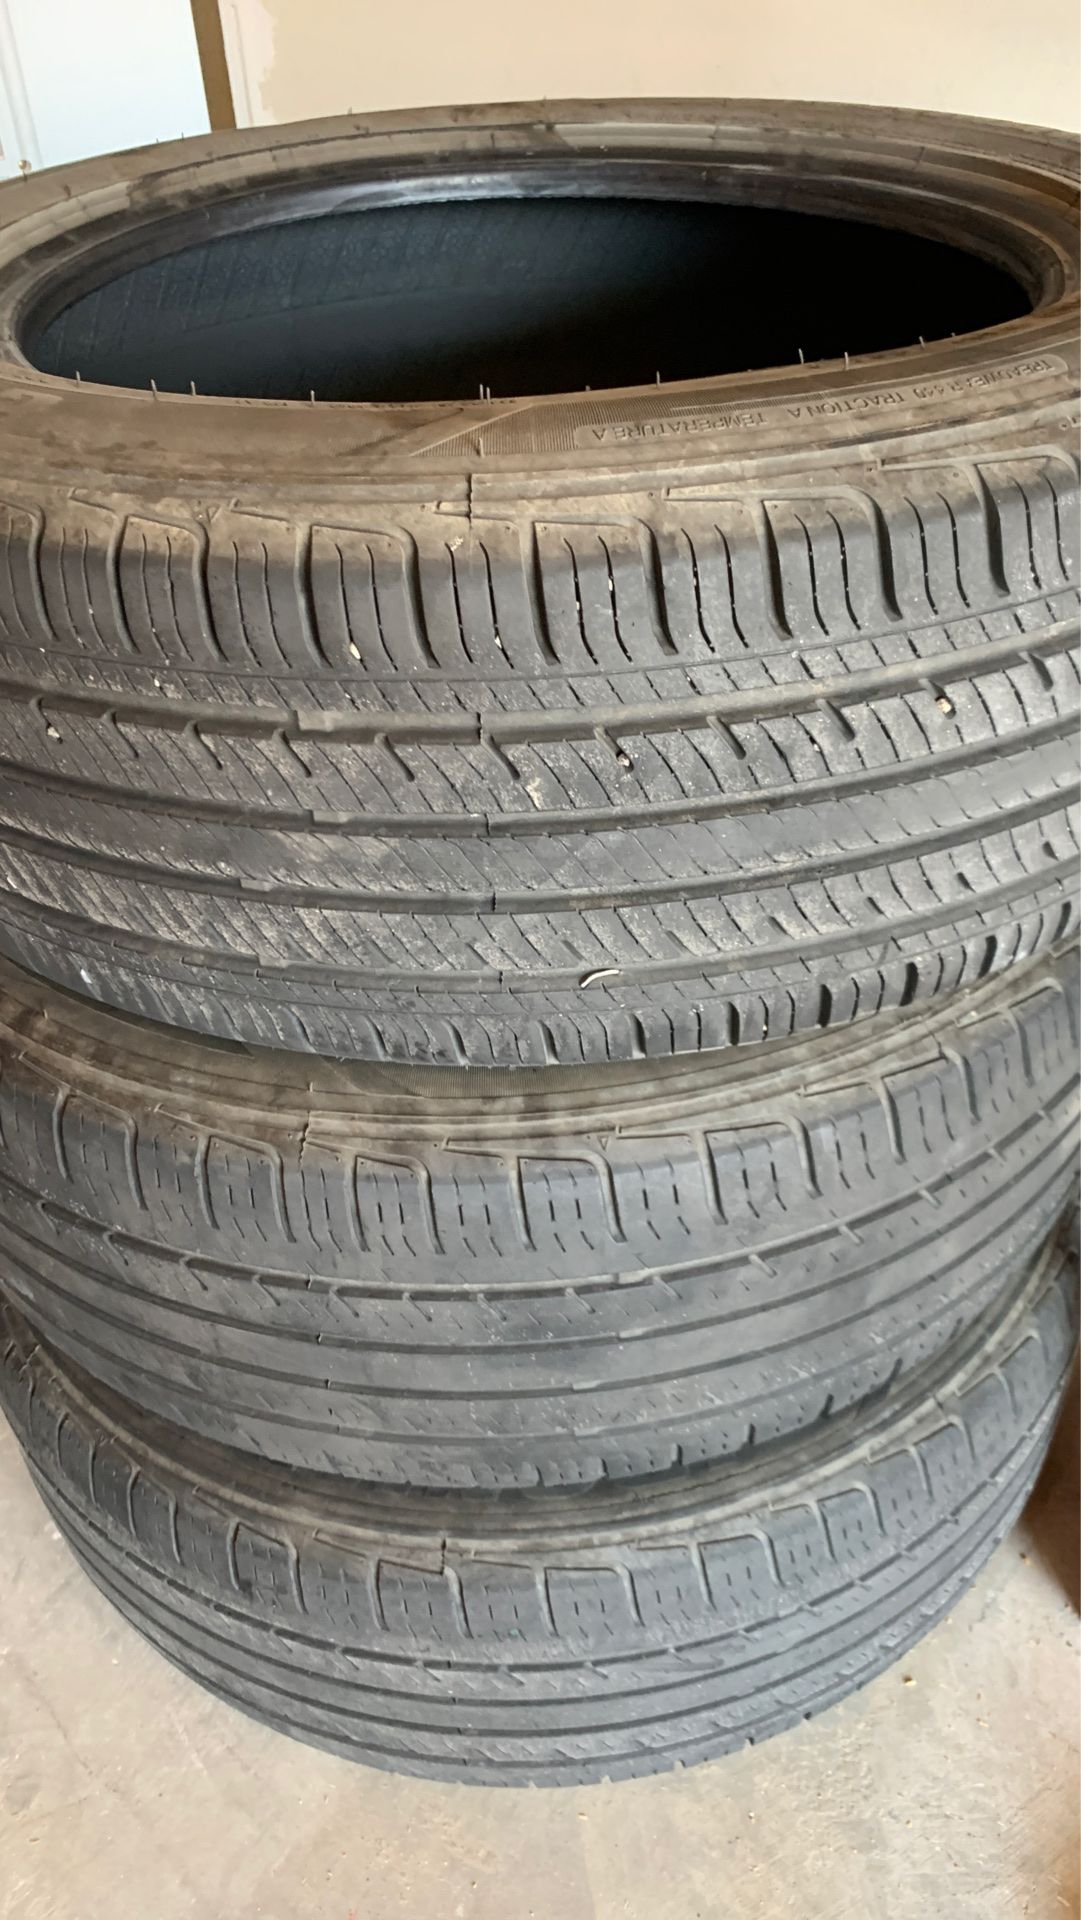 Used Tires For Sale